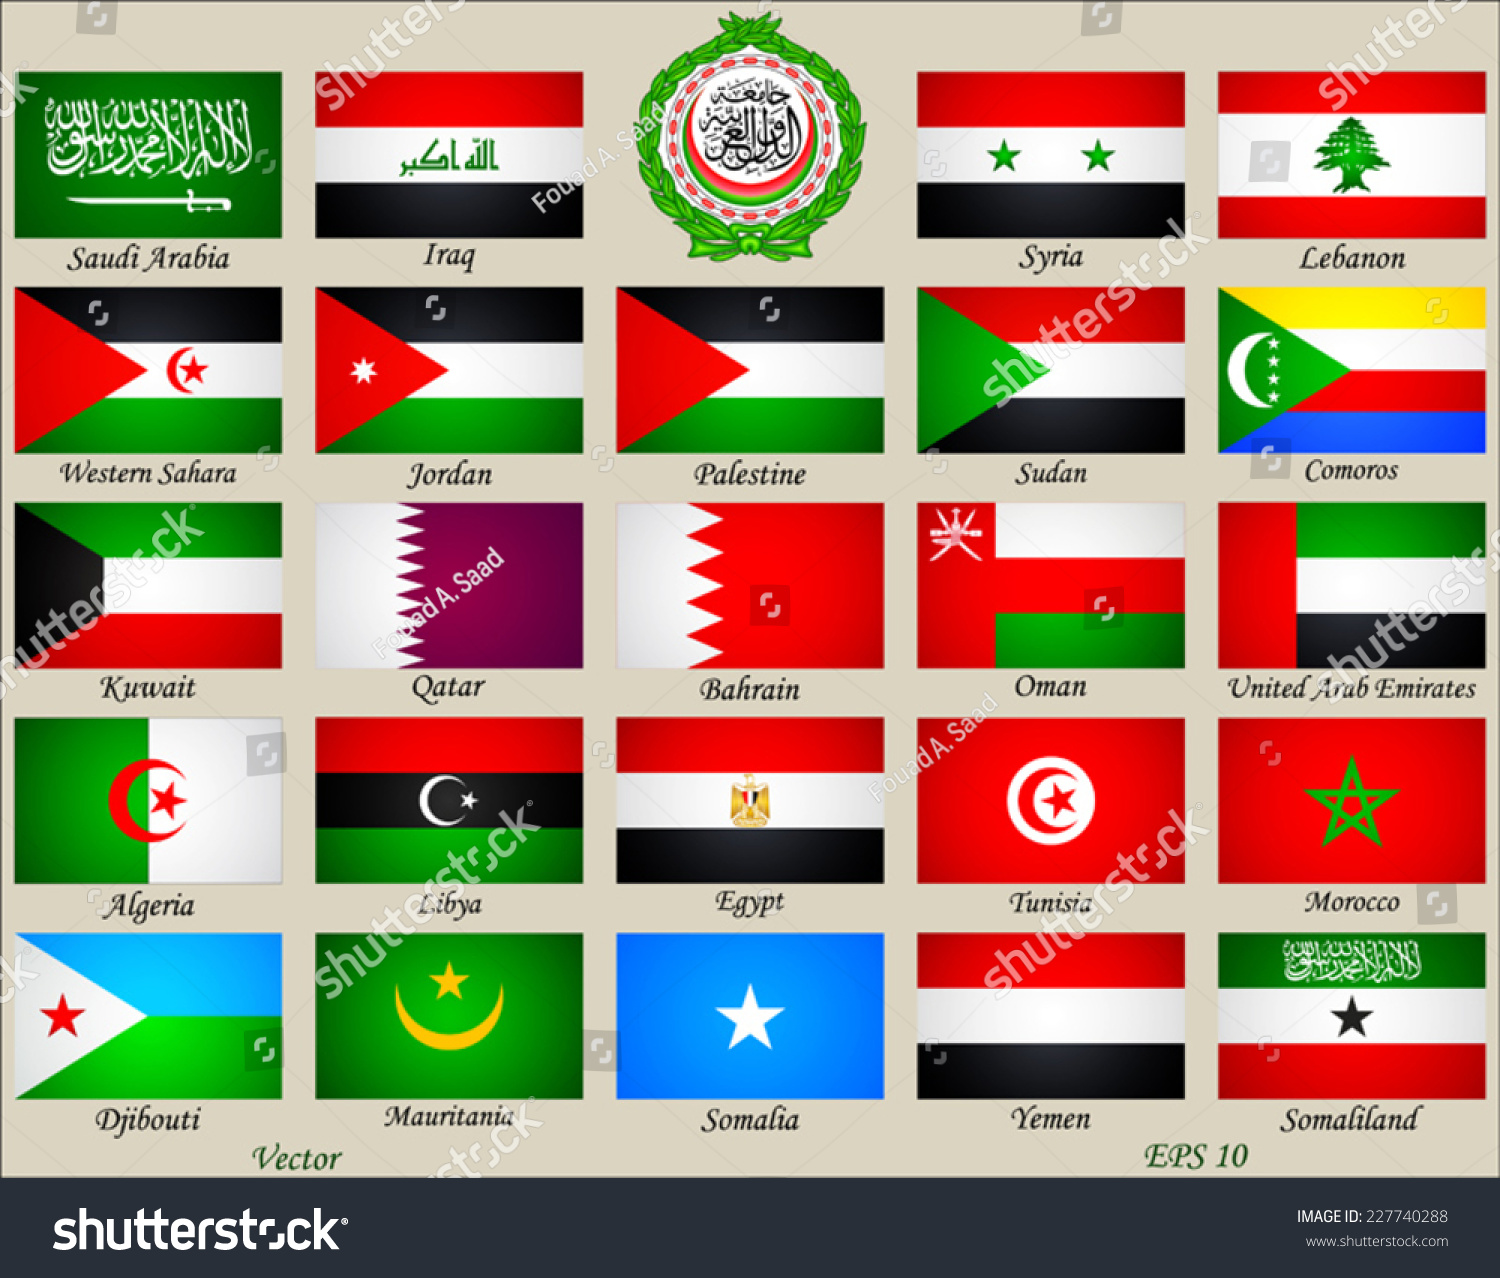 Arab Countries Flags With Names